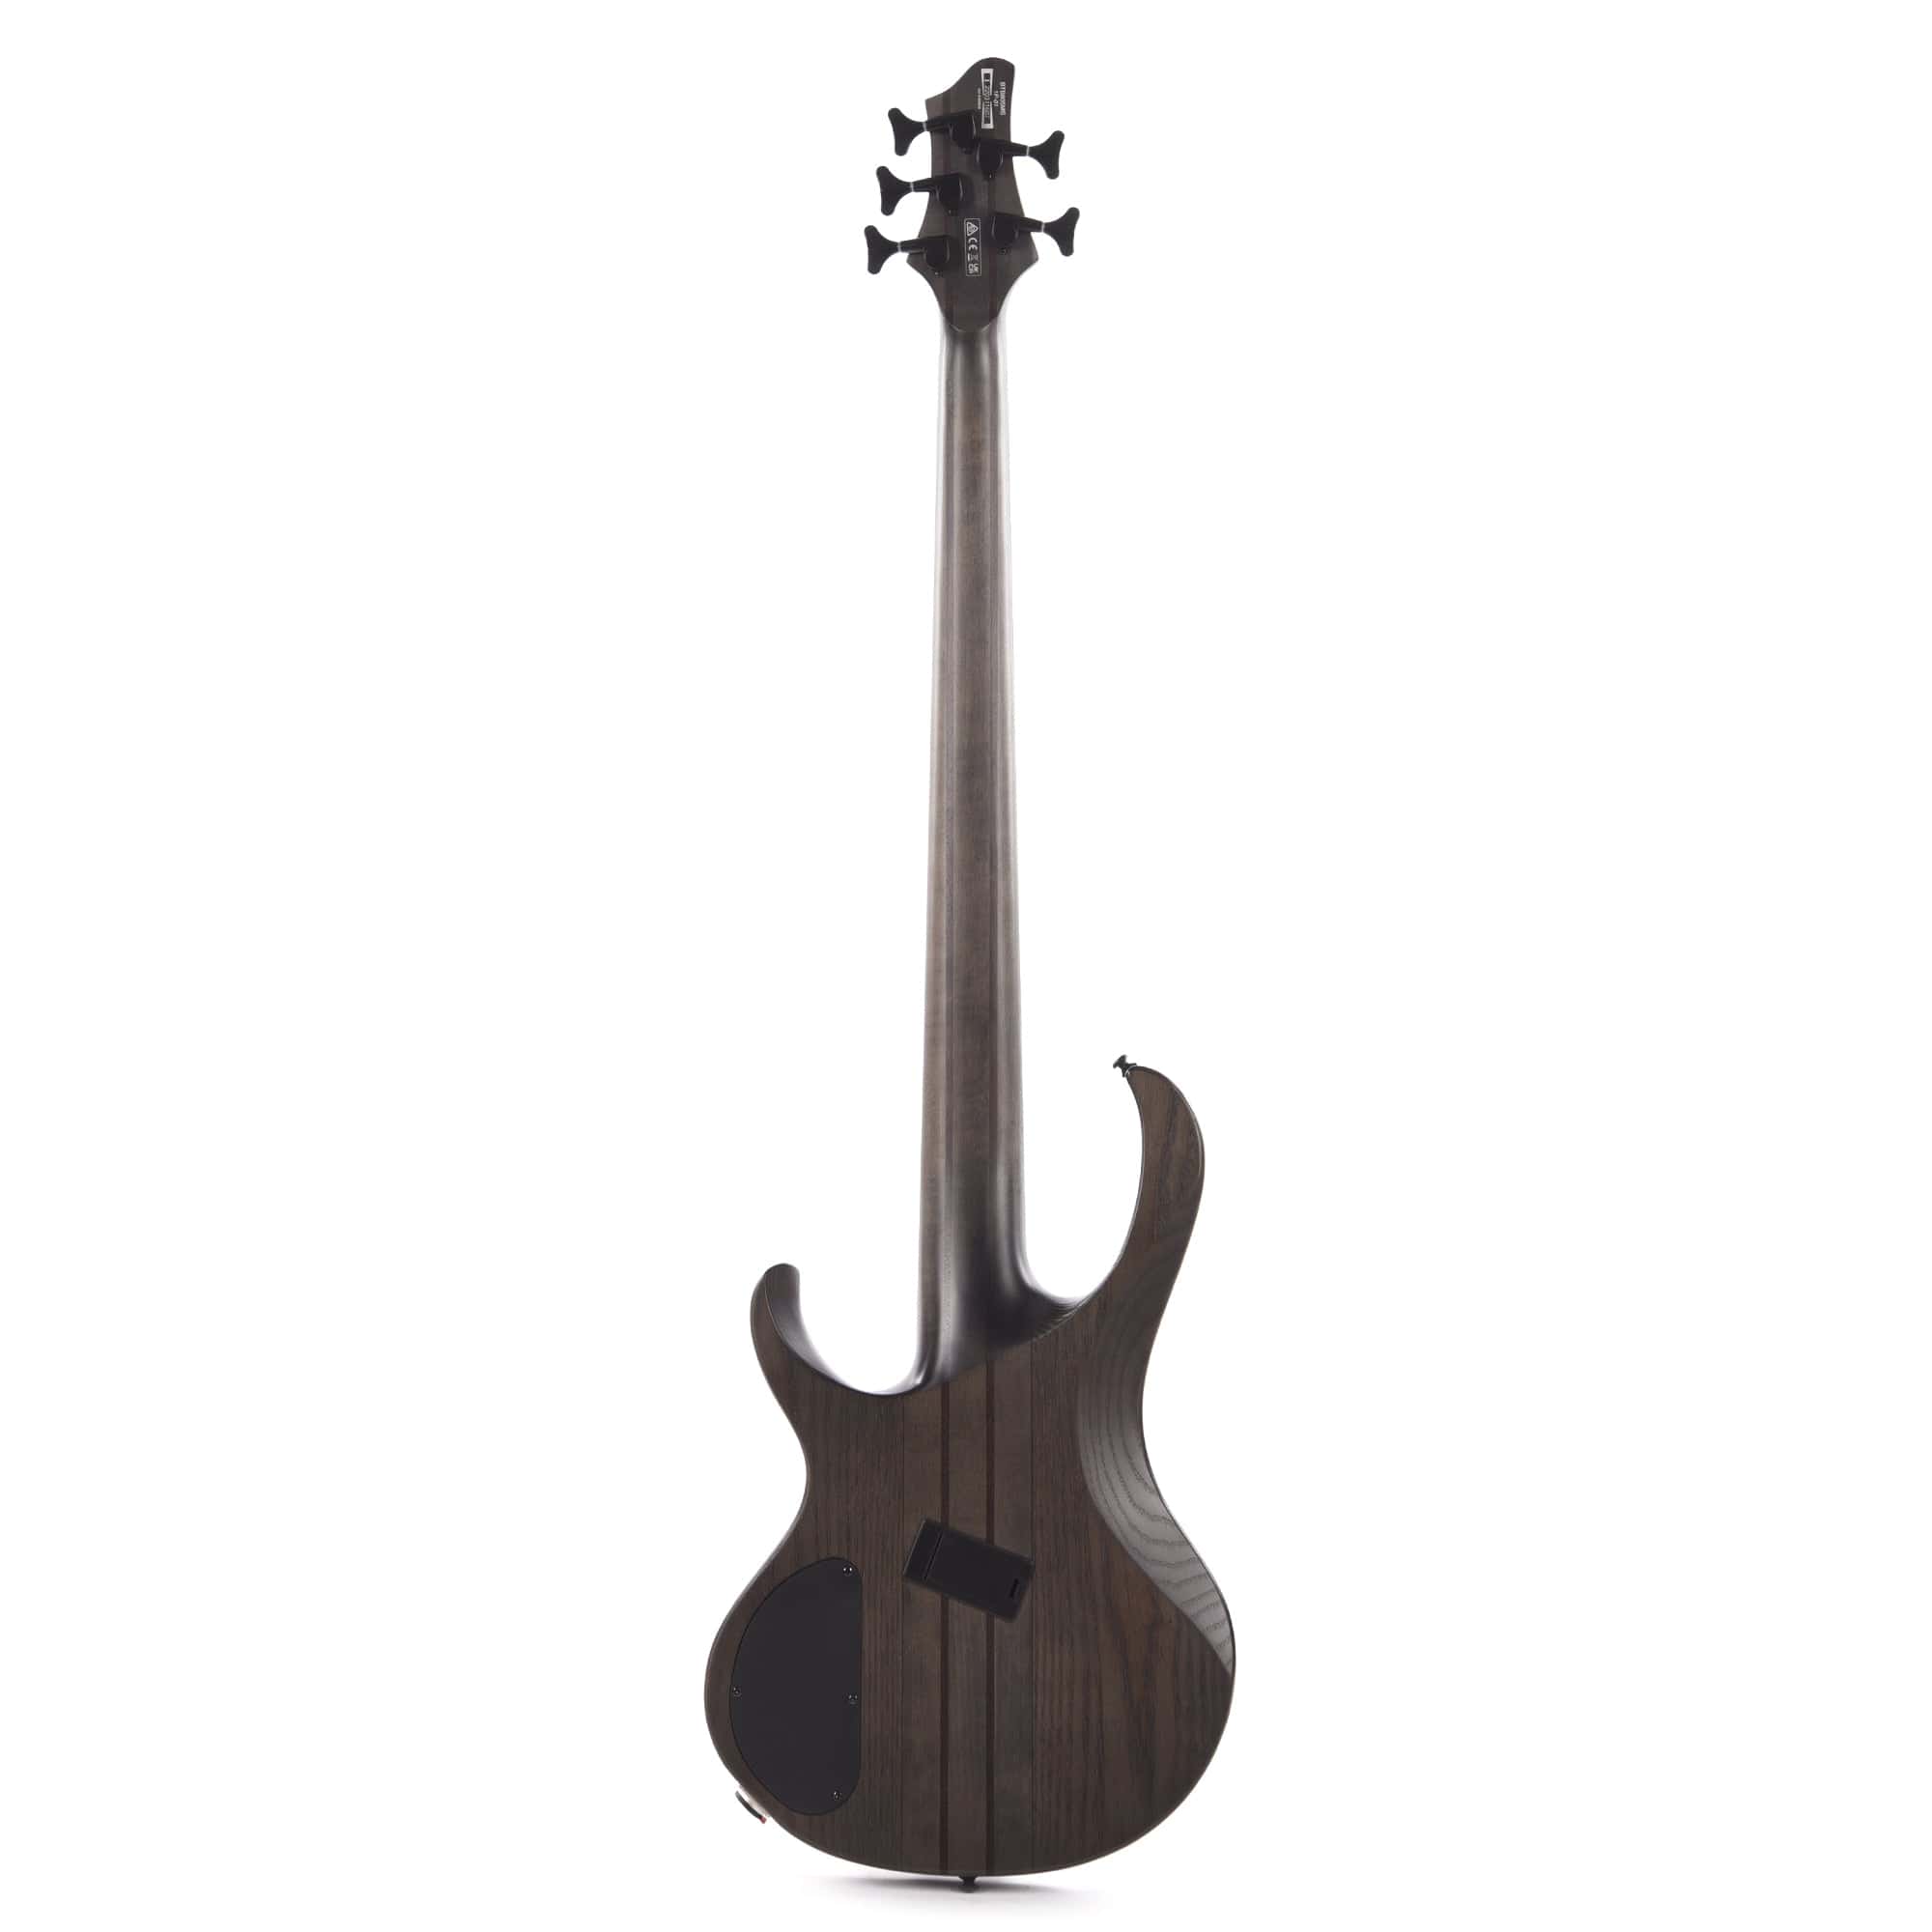 Ibanez BTB805MS Bass Workshop 5-String Bass Multi-Scale Transparent Gray Flat Bass Guitars / 5-String or More